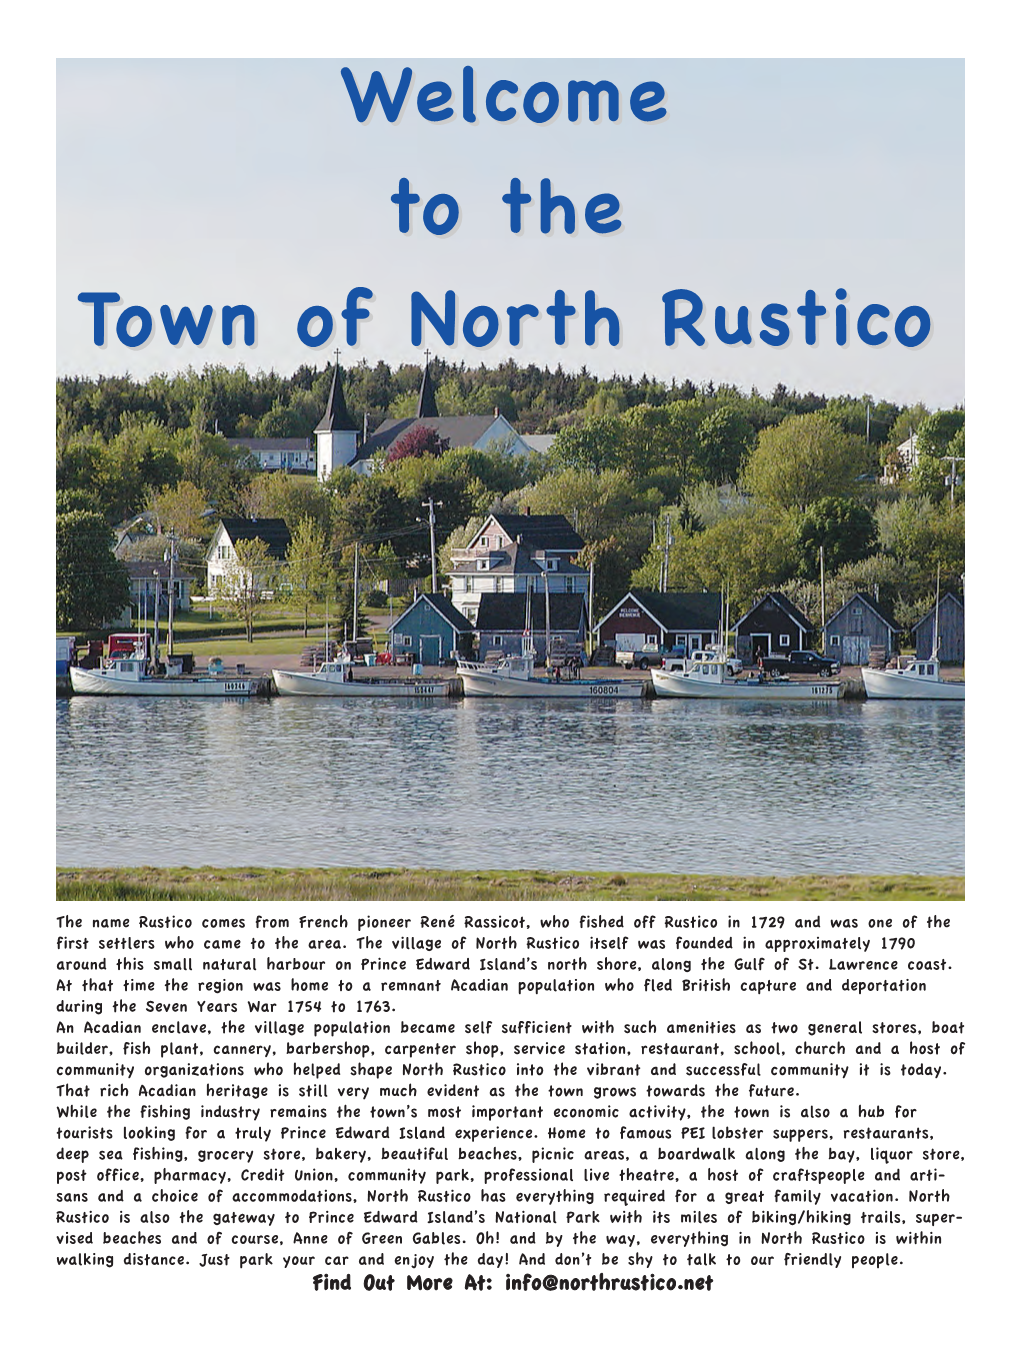 The Town of North Rustico